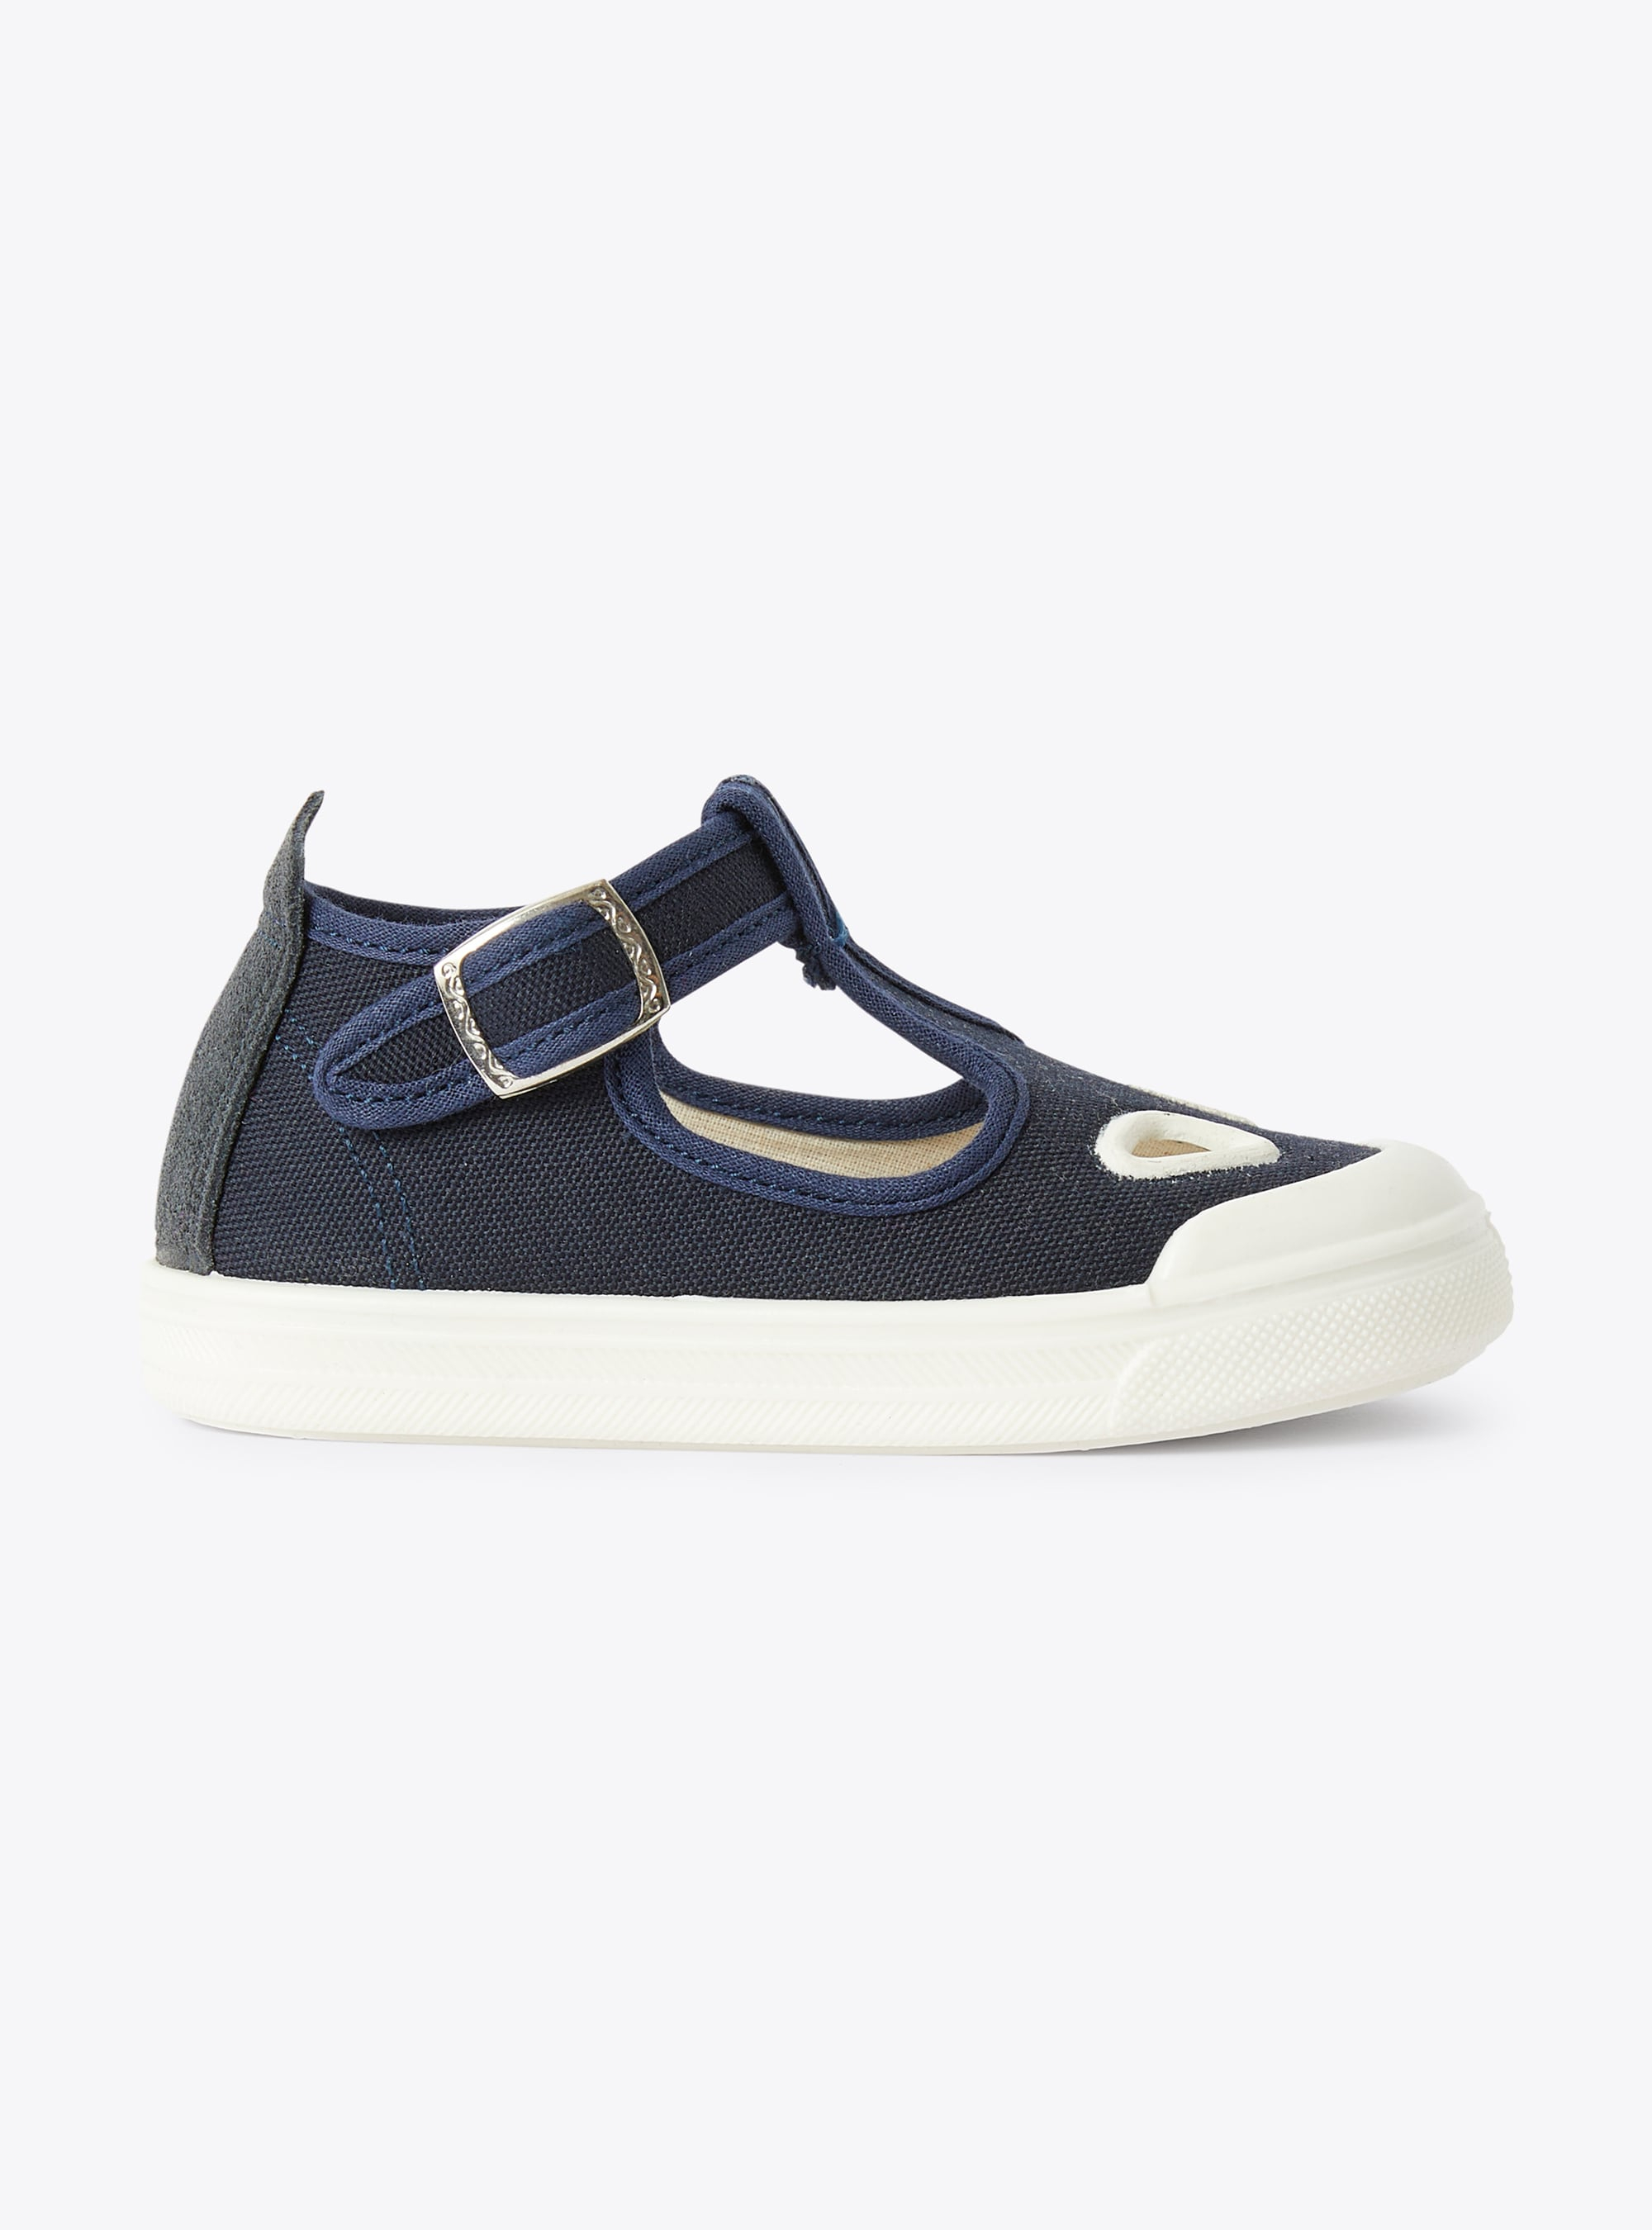 Sandal in blue canvas with a t-bar design and decorative holes - Blue | Il Gufo